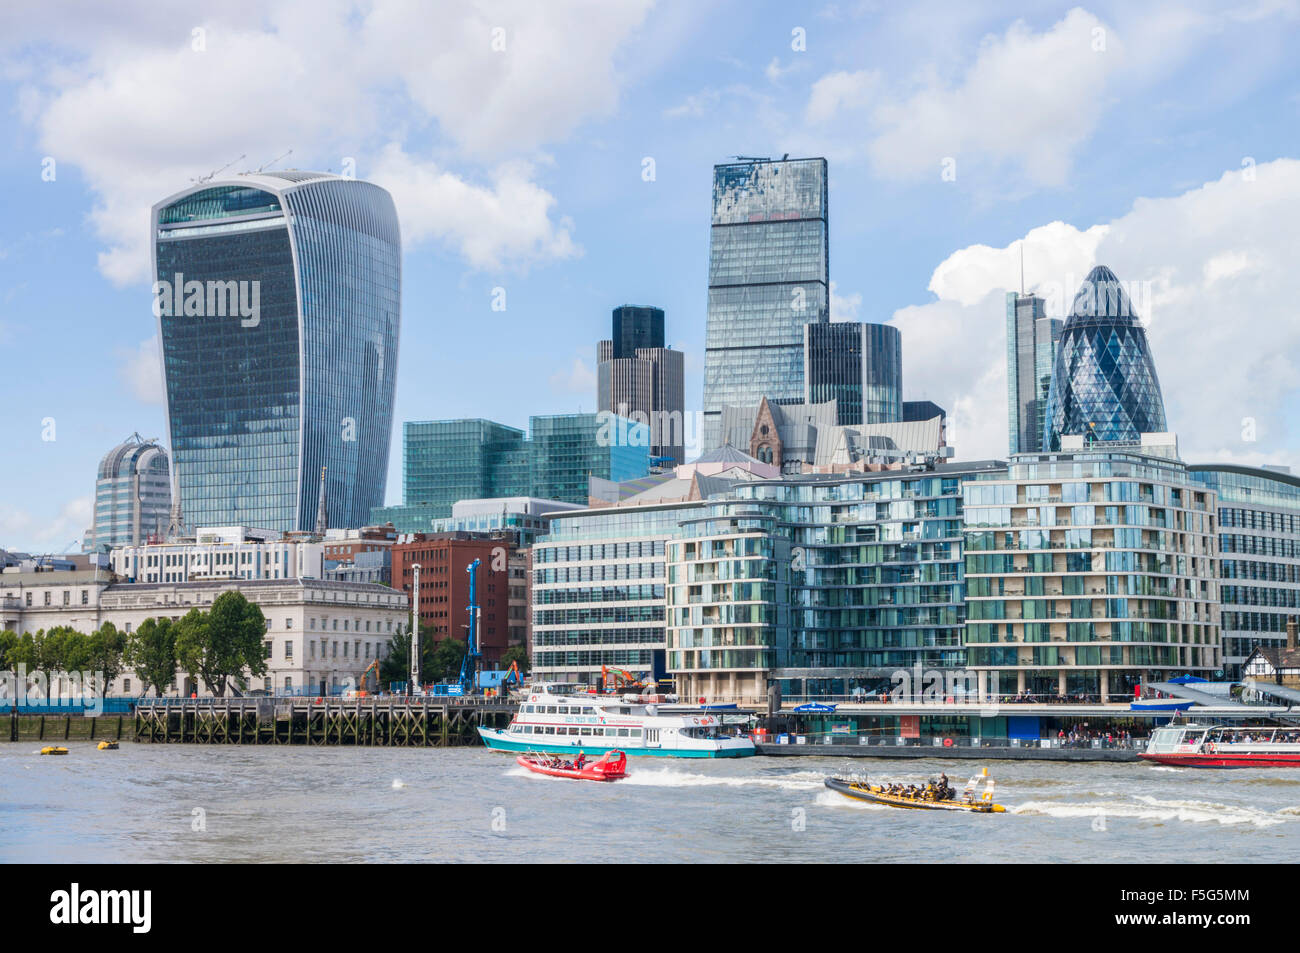 City of London skyline financial district skyscrapers River Thames City of London UK GB EU Europe Stock Photo